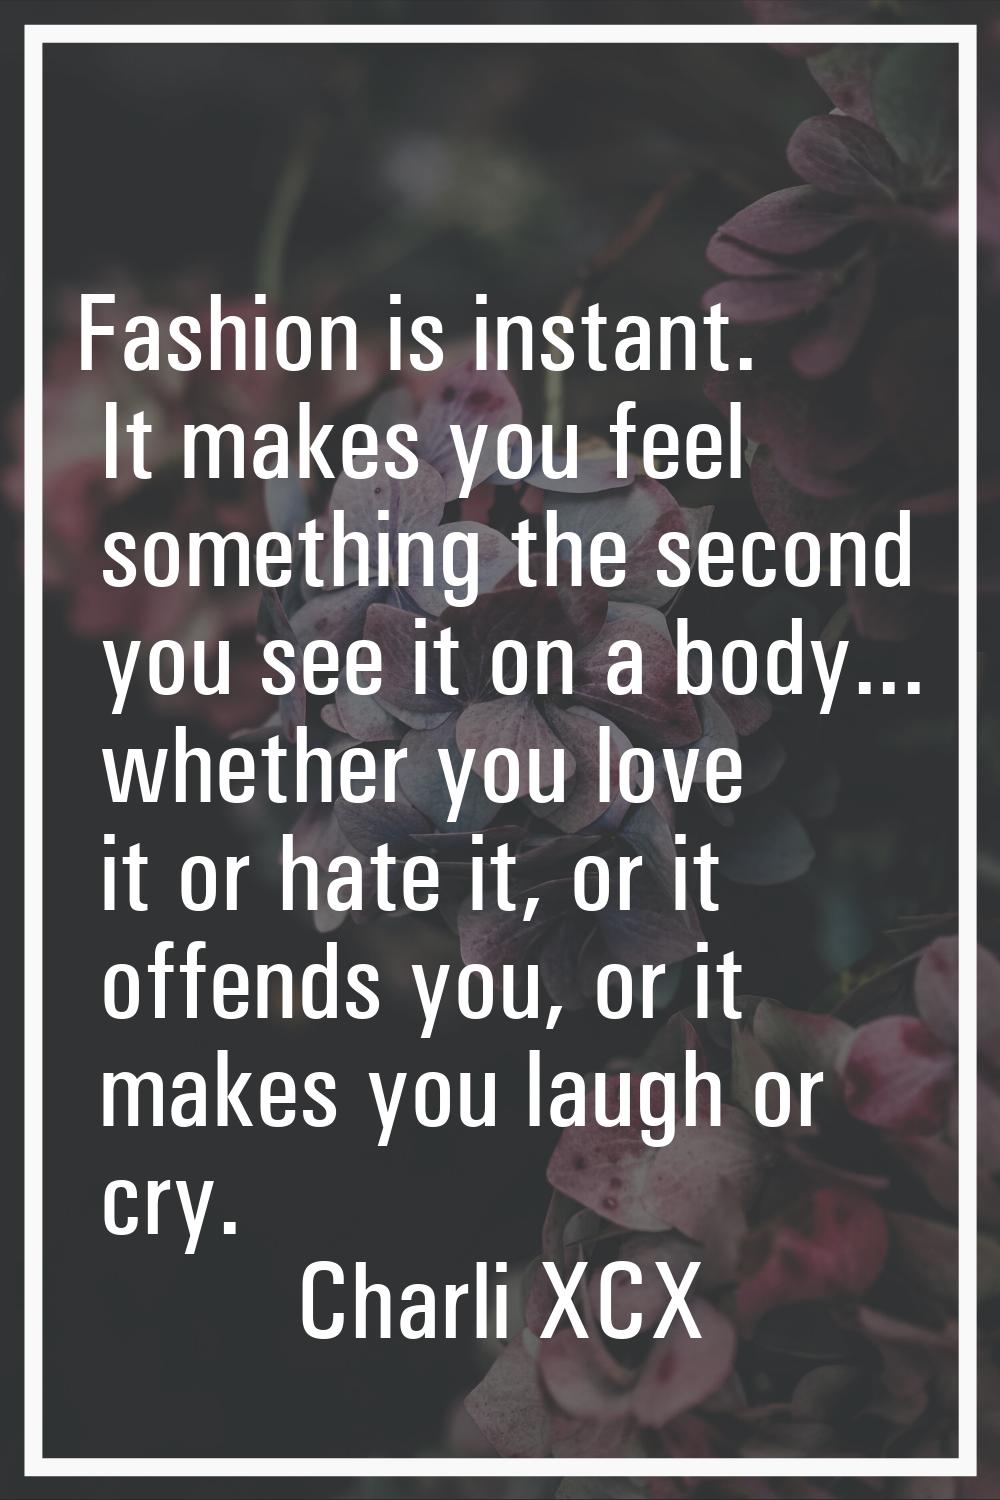 Fashion is instant. It makes you feel something the second you see it on a body... whether you love